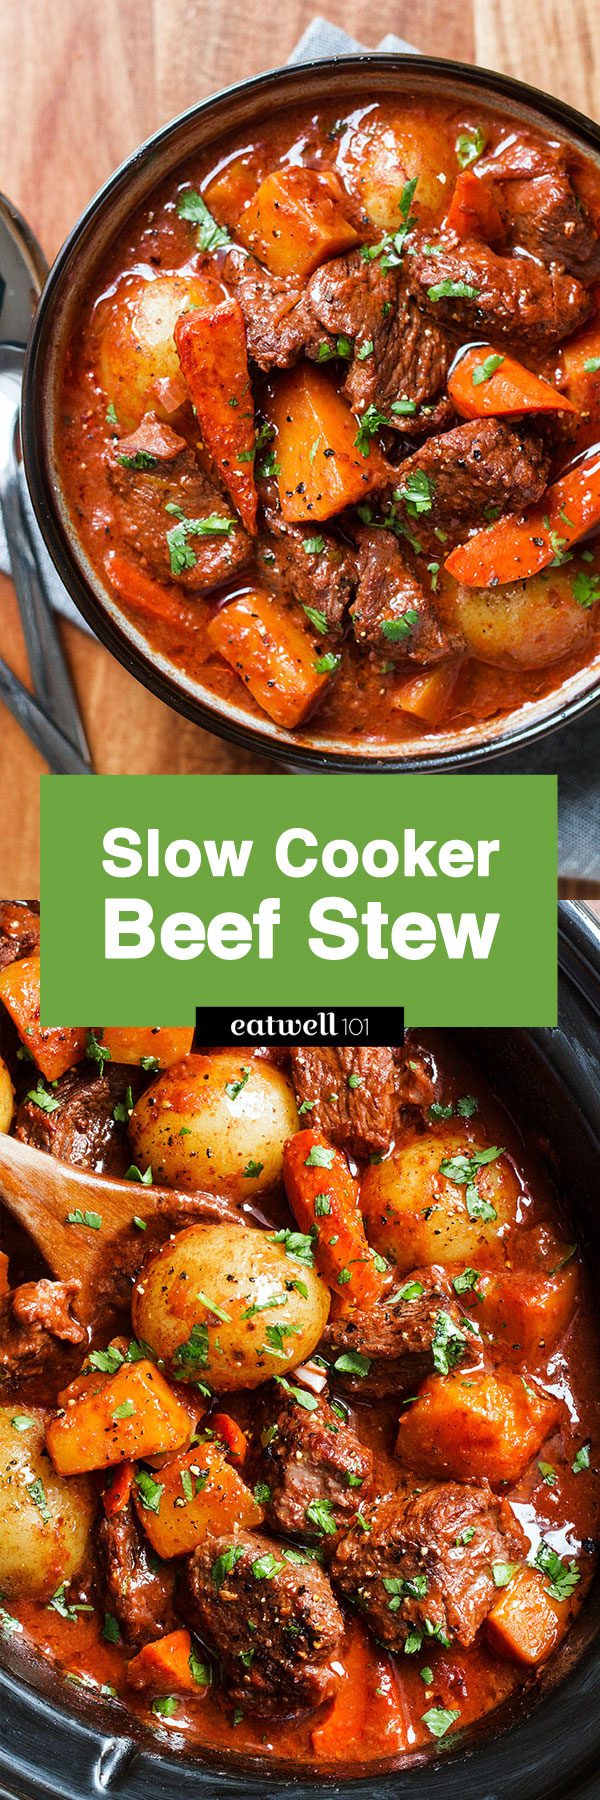 Slow Cooker Beef Stew Recipe -  #slow-cooker #crockpot #beef #stew #recipe #eatwell101 - A hearty and delicious beef stew that is loaded with hearty veggies and incredible flavor!